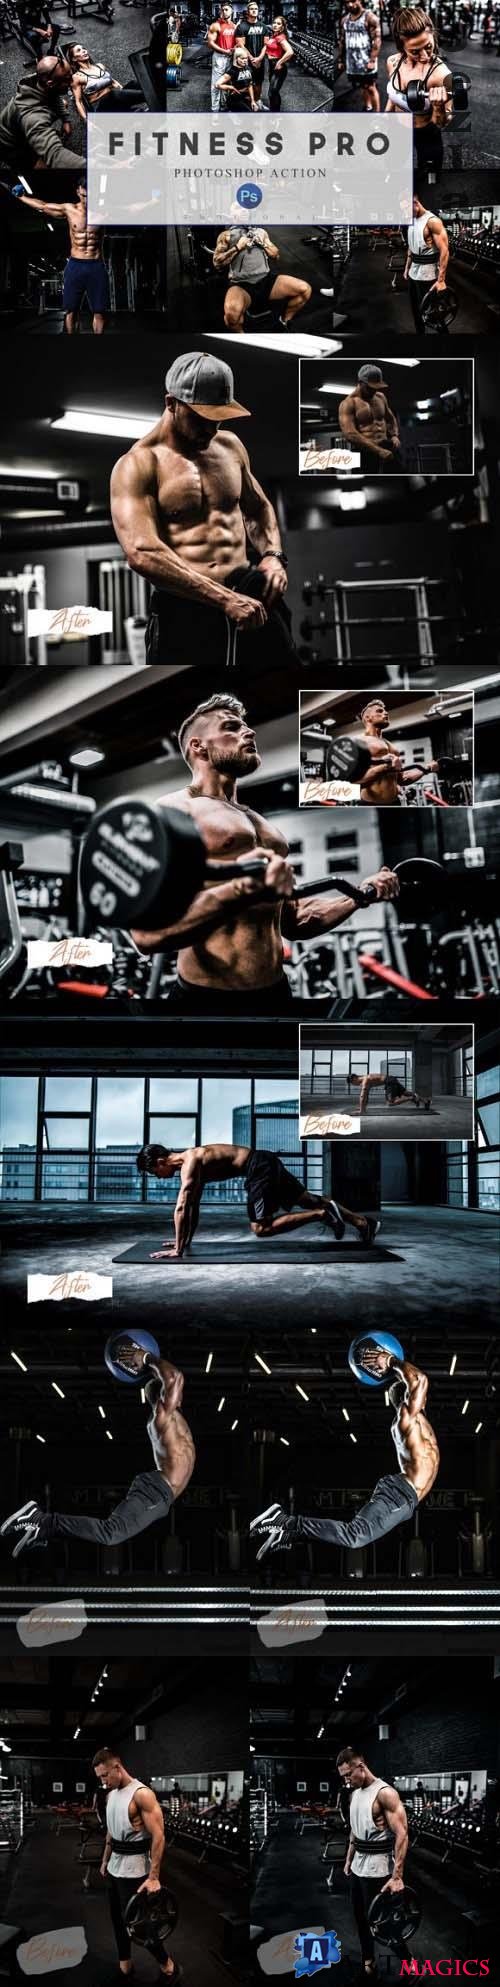 12 Photoshop Actions ACR LUT Fitness Pro